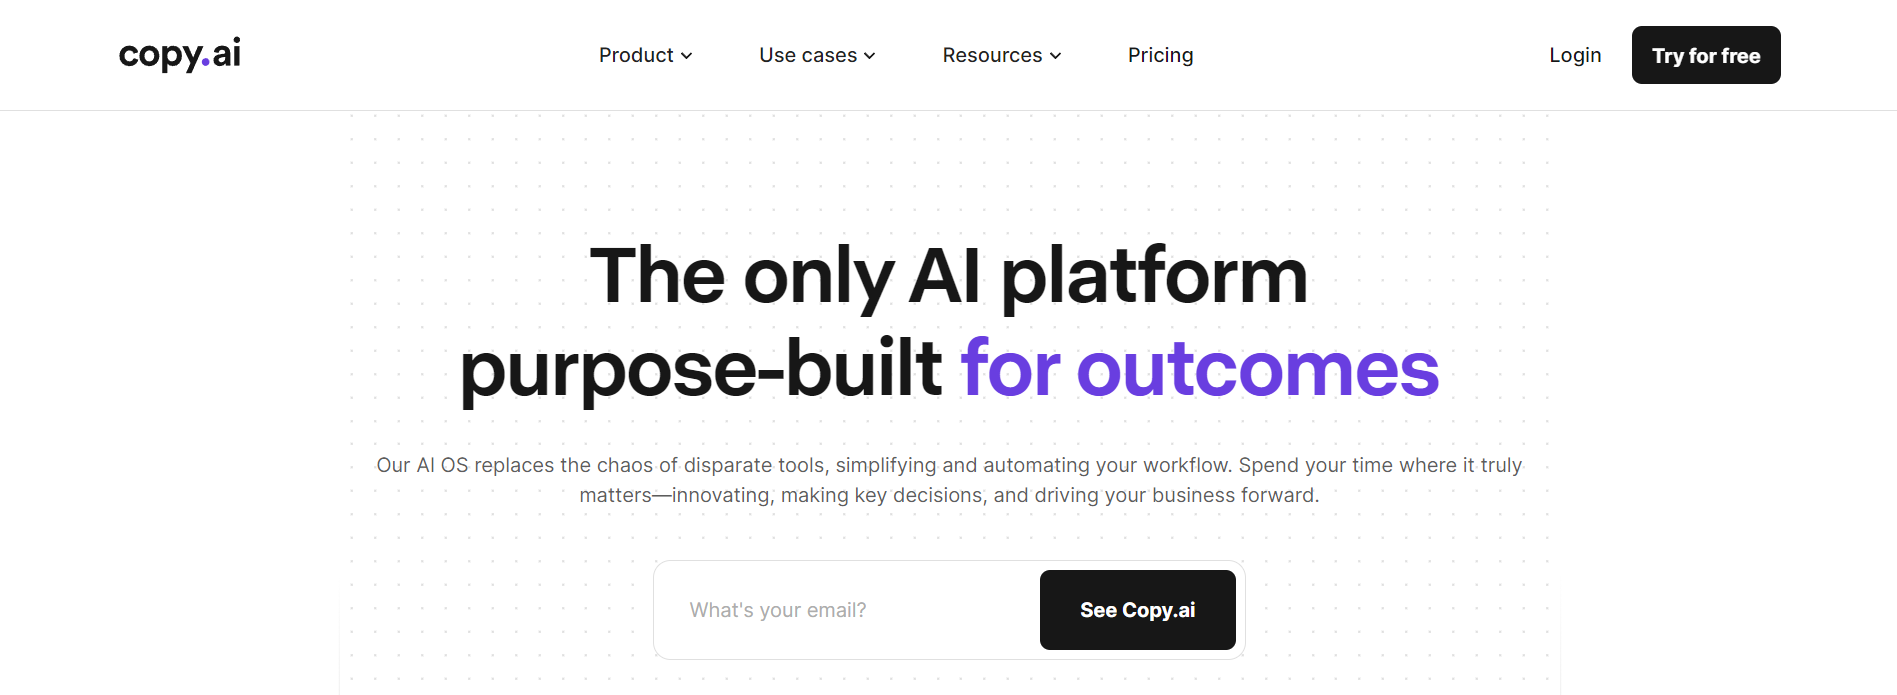 Copy.ai-best-for-enhanced-copywriting-and-productivity-with-advanced-capabilities-and-intuitive-design.